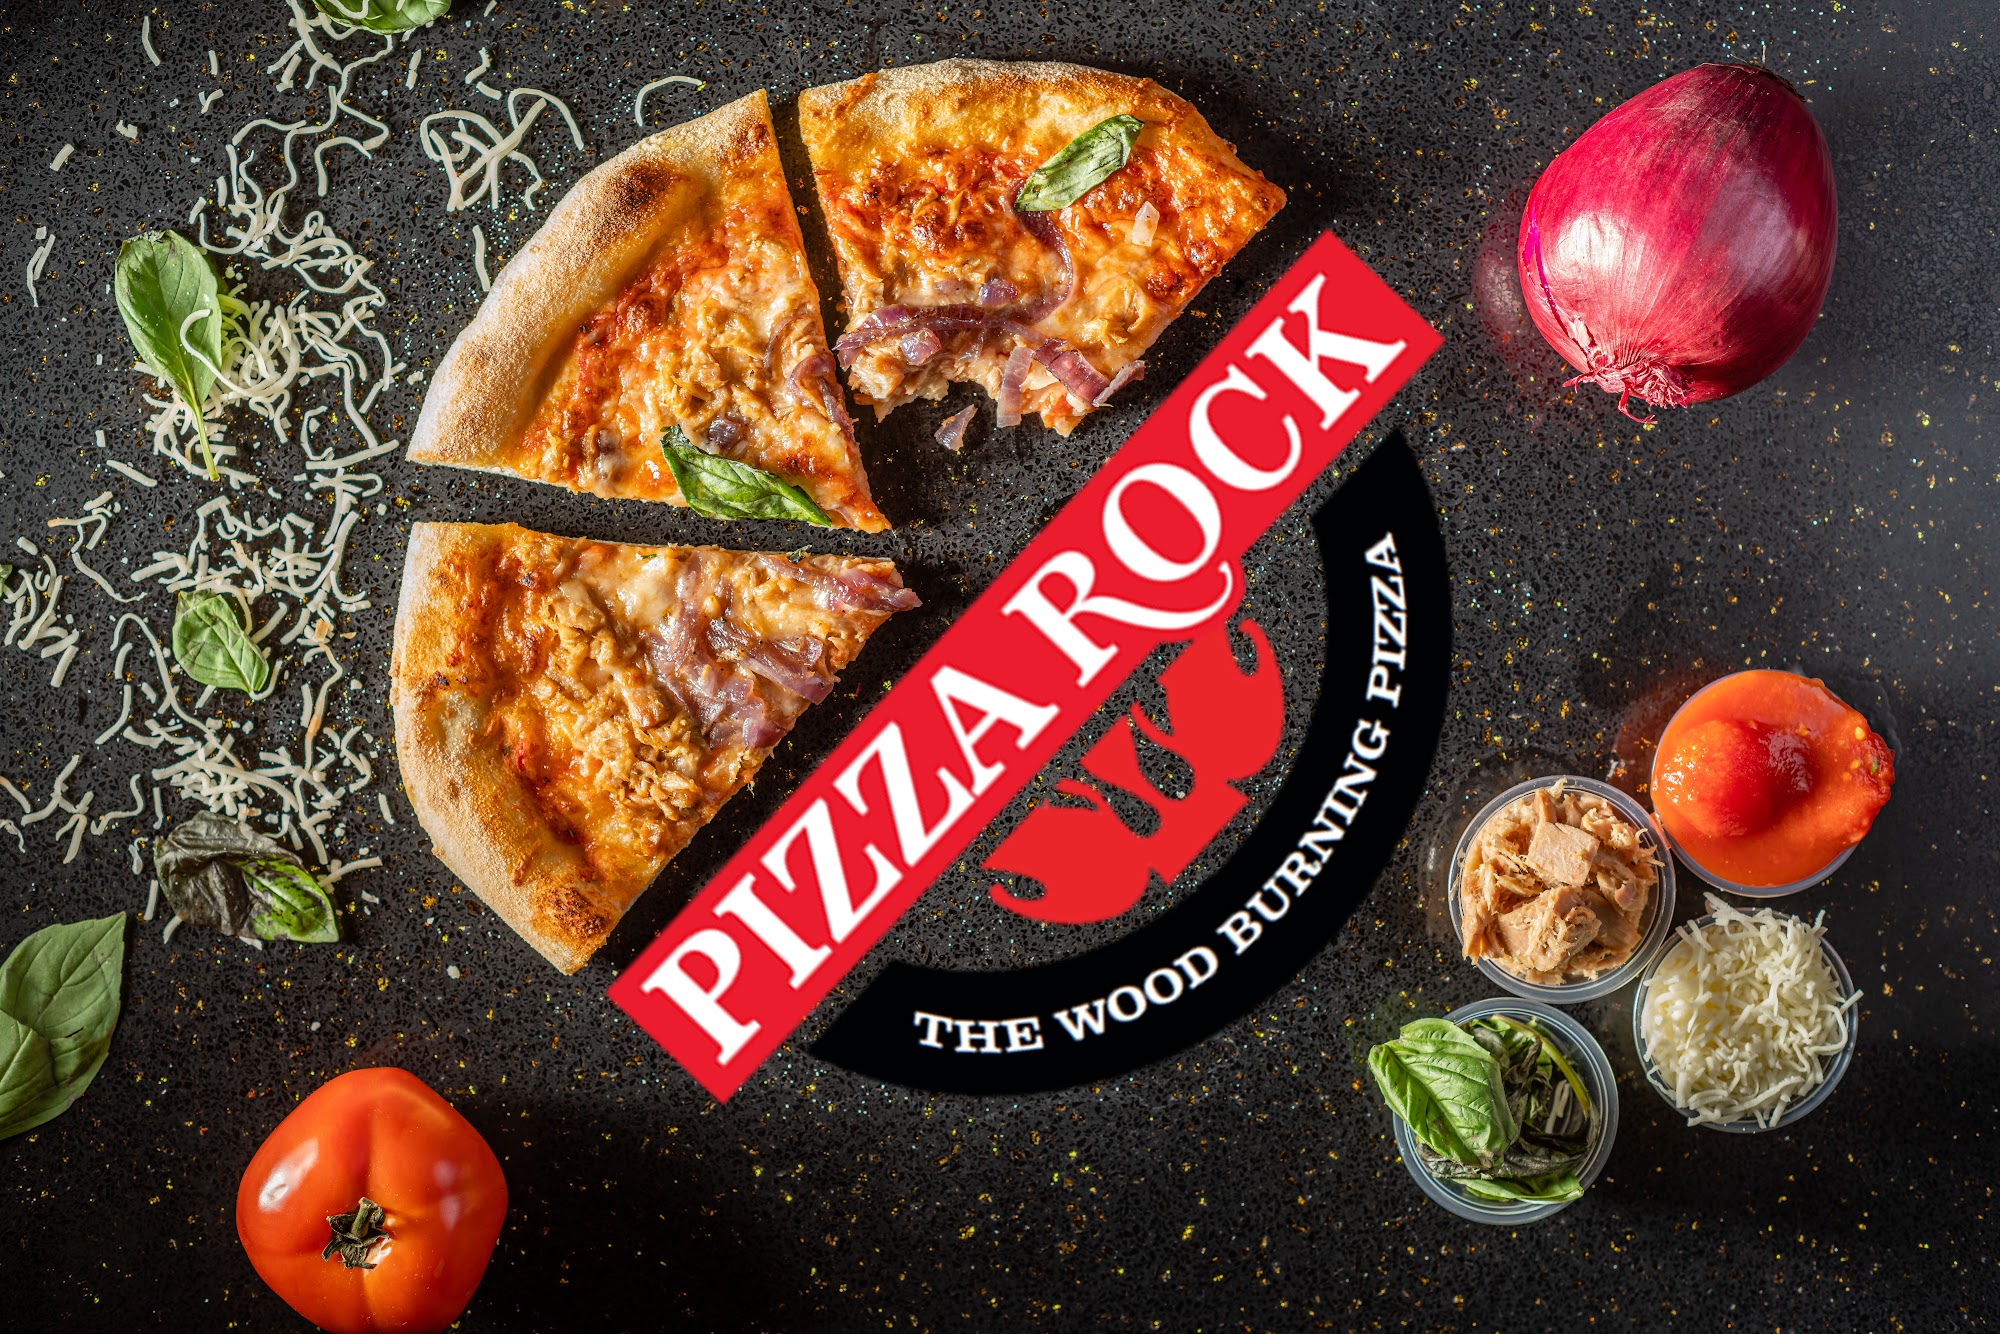 Pizza Rock - The Wood Burning Pizza